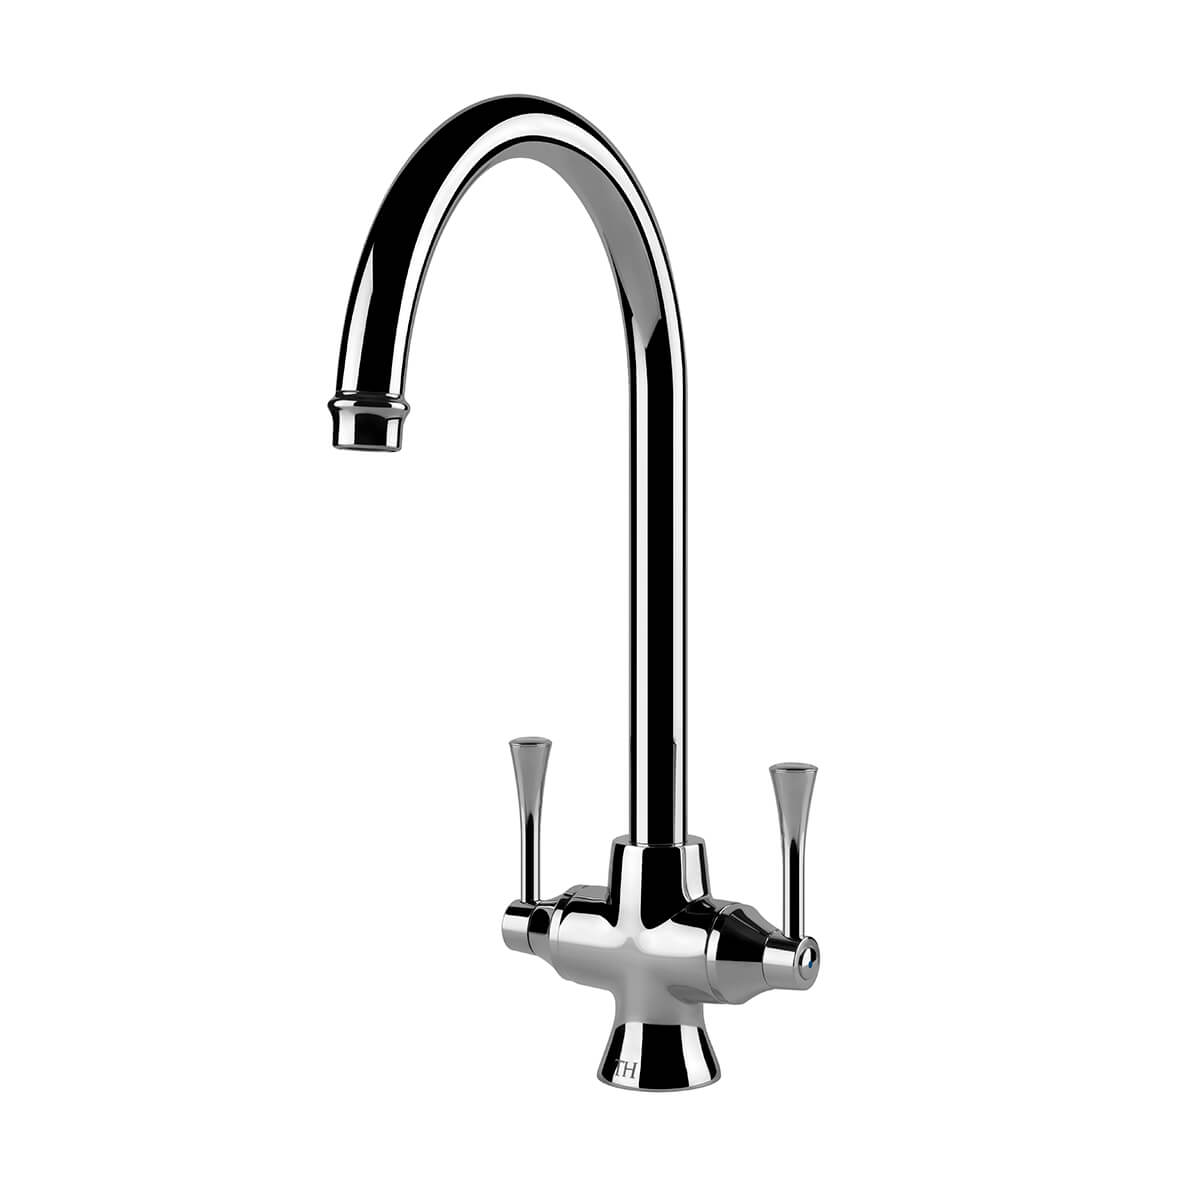 TURNER HASTINGS GOSFORD DOUBLE SINK MIXER 390MM CHROME